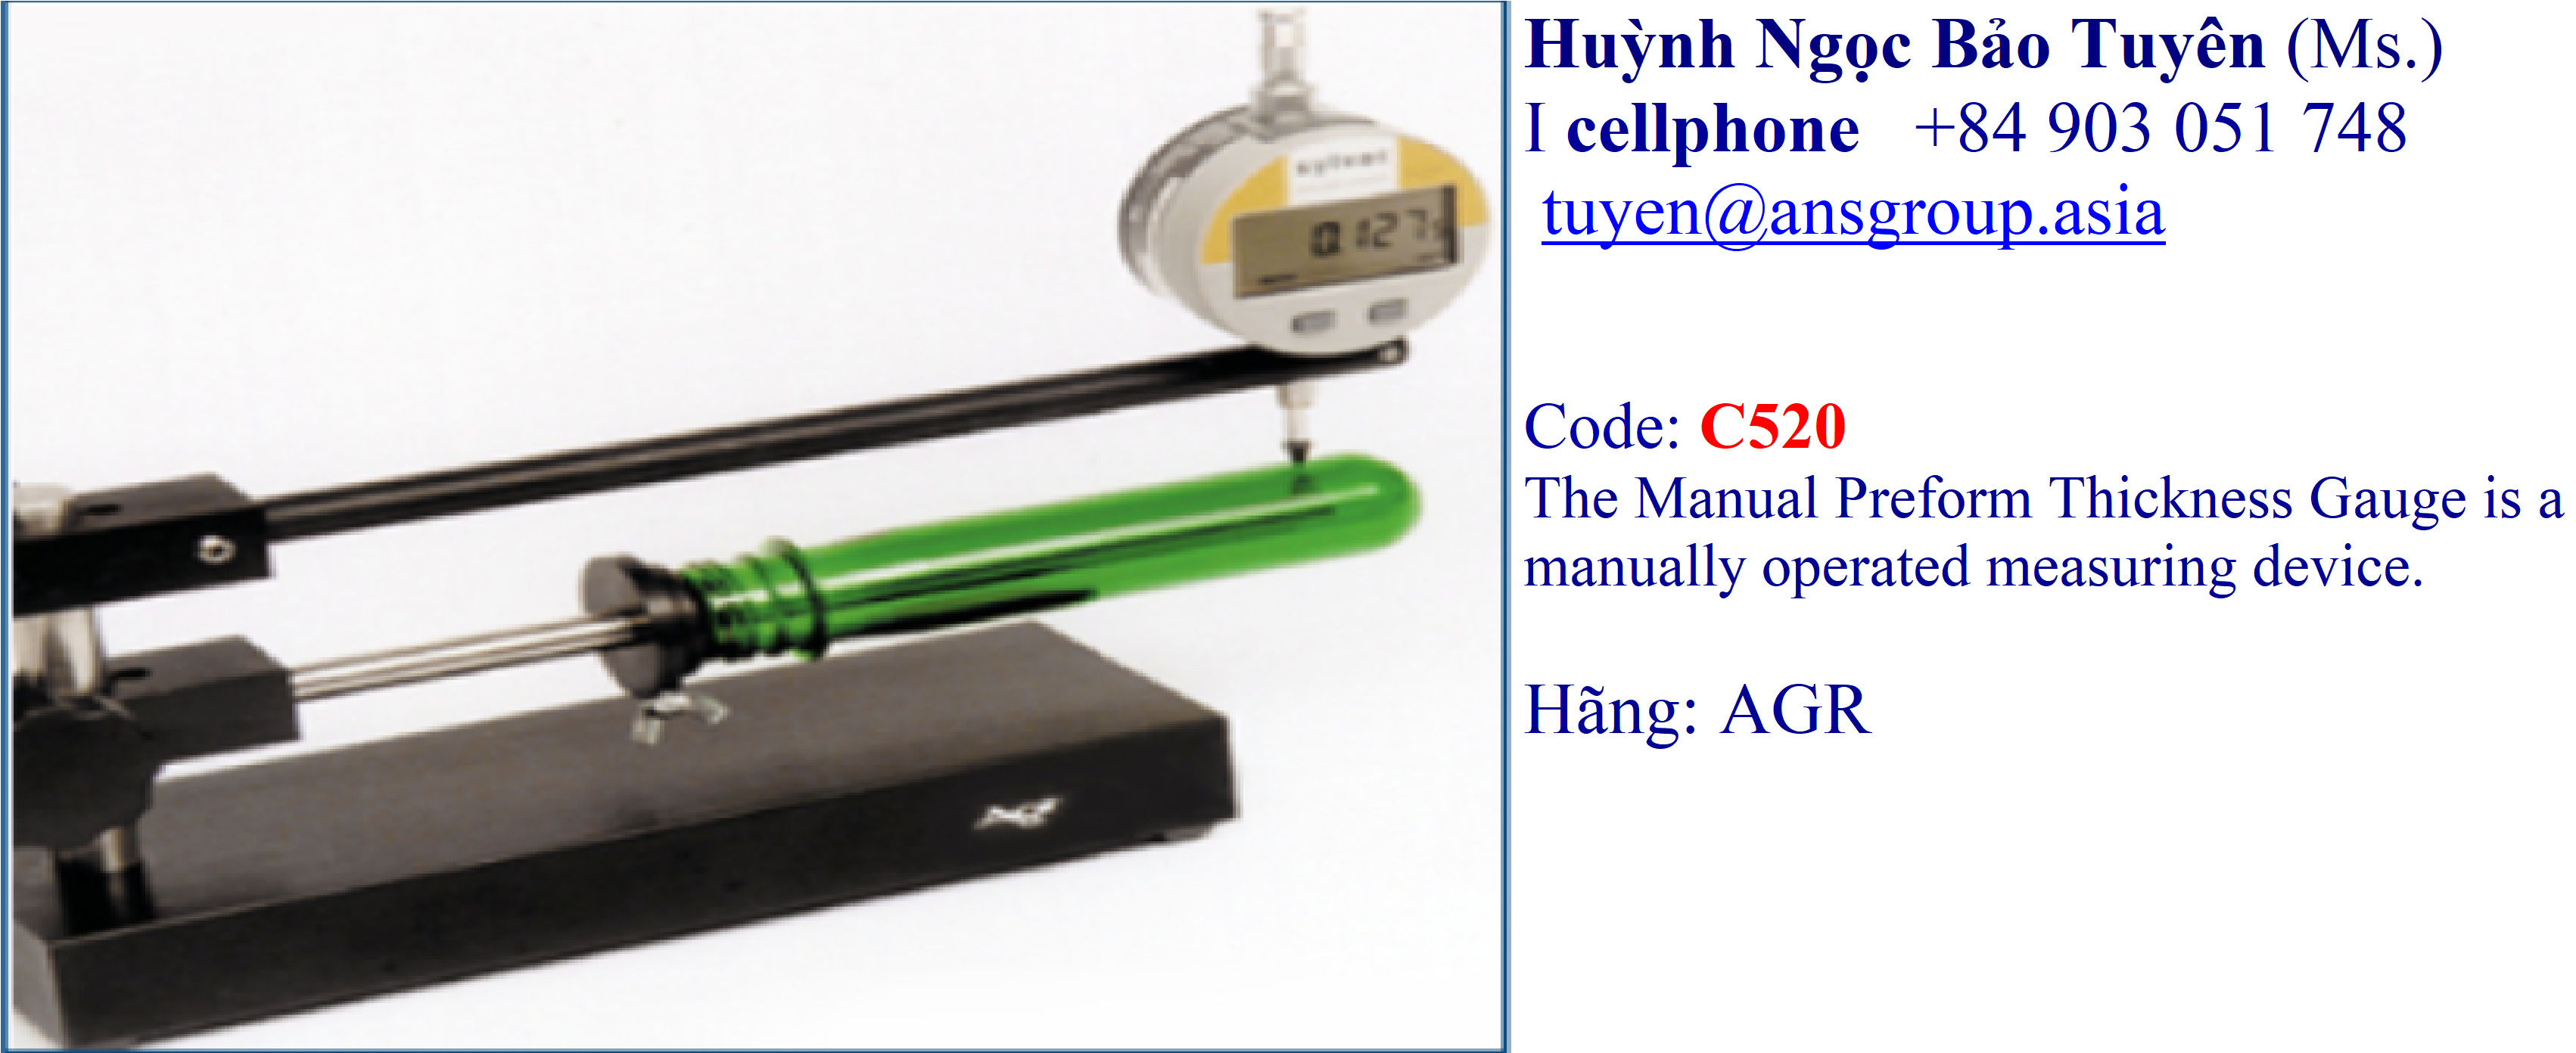 code-c520-crate-mptg-mptg-packaging-charge-agr-vietnam.png